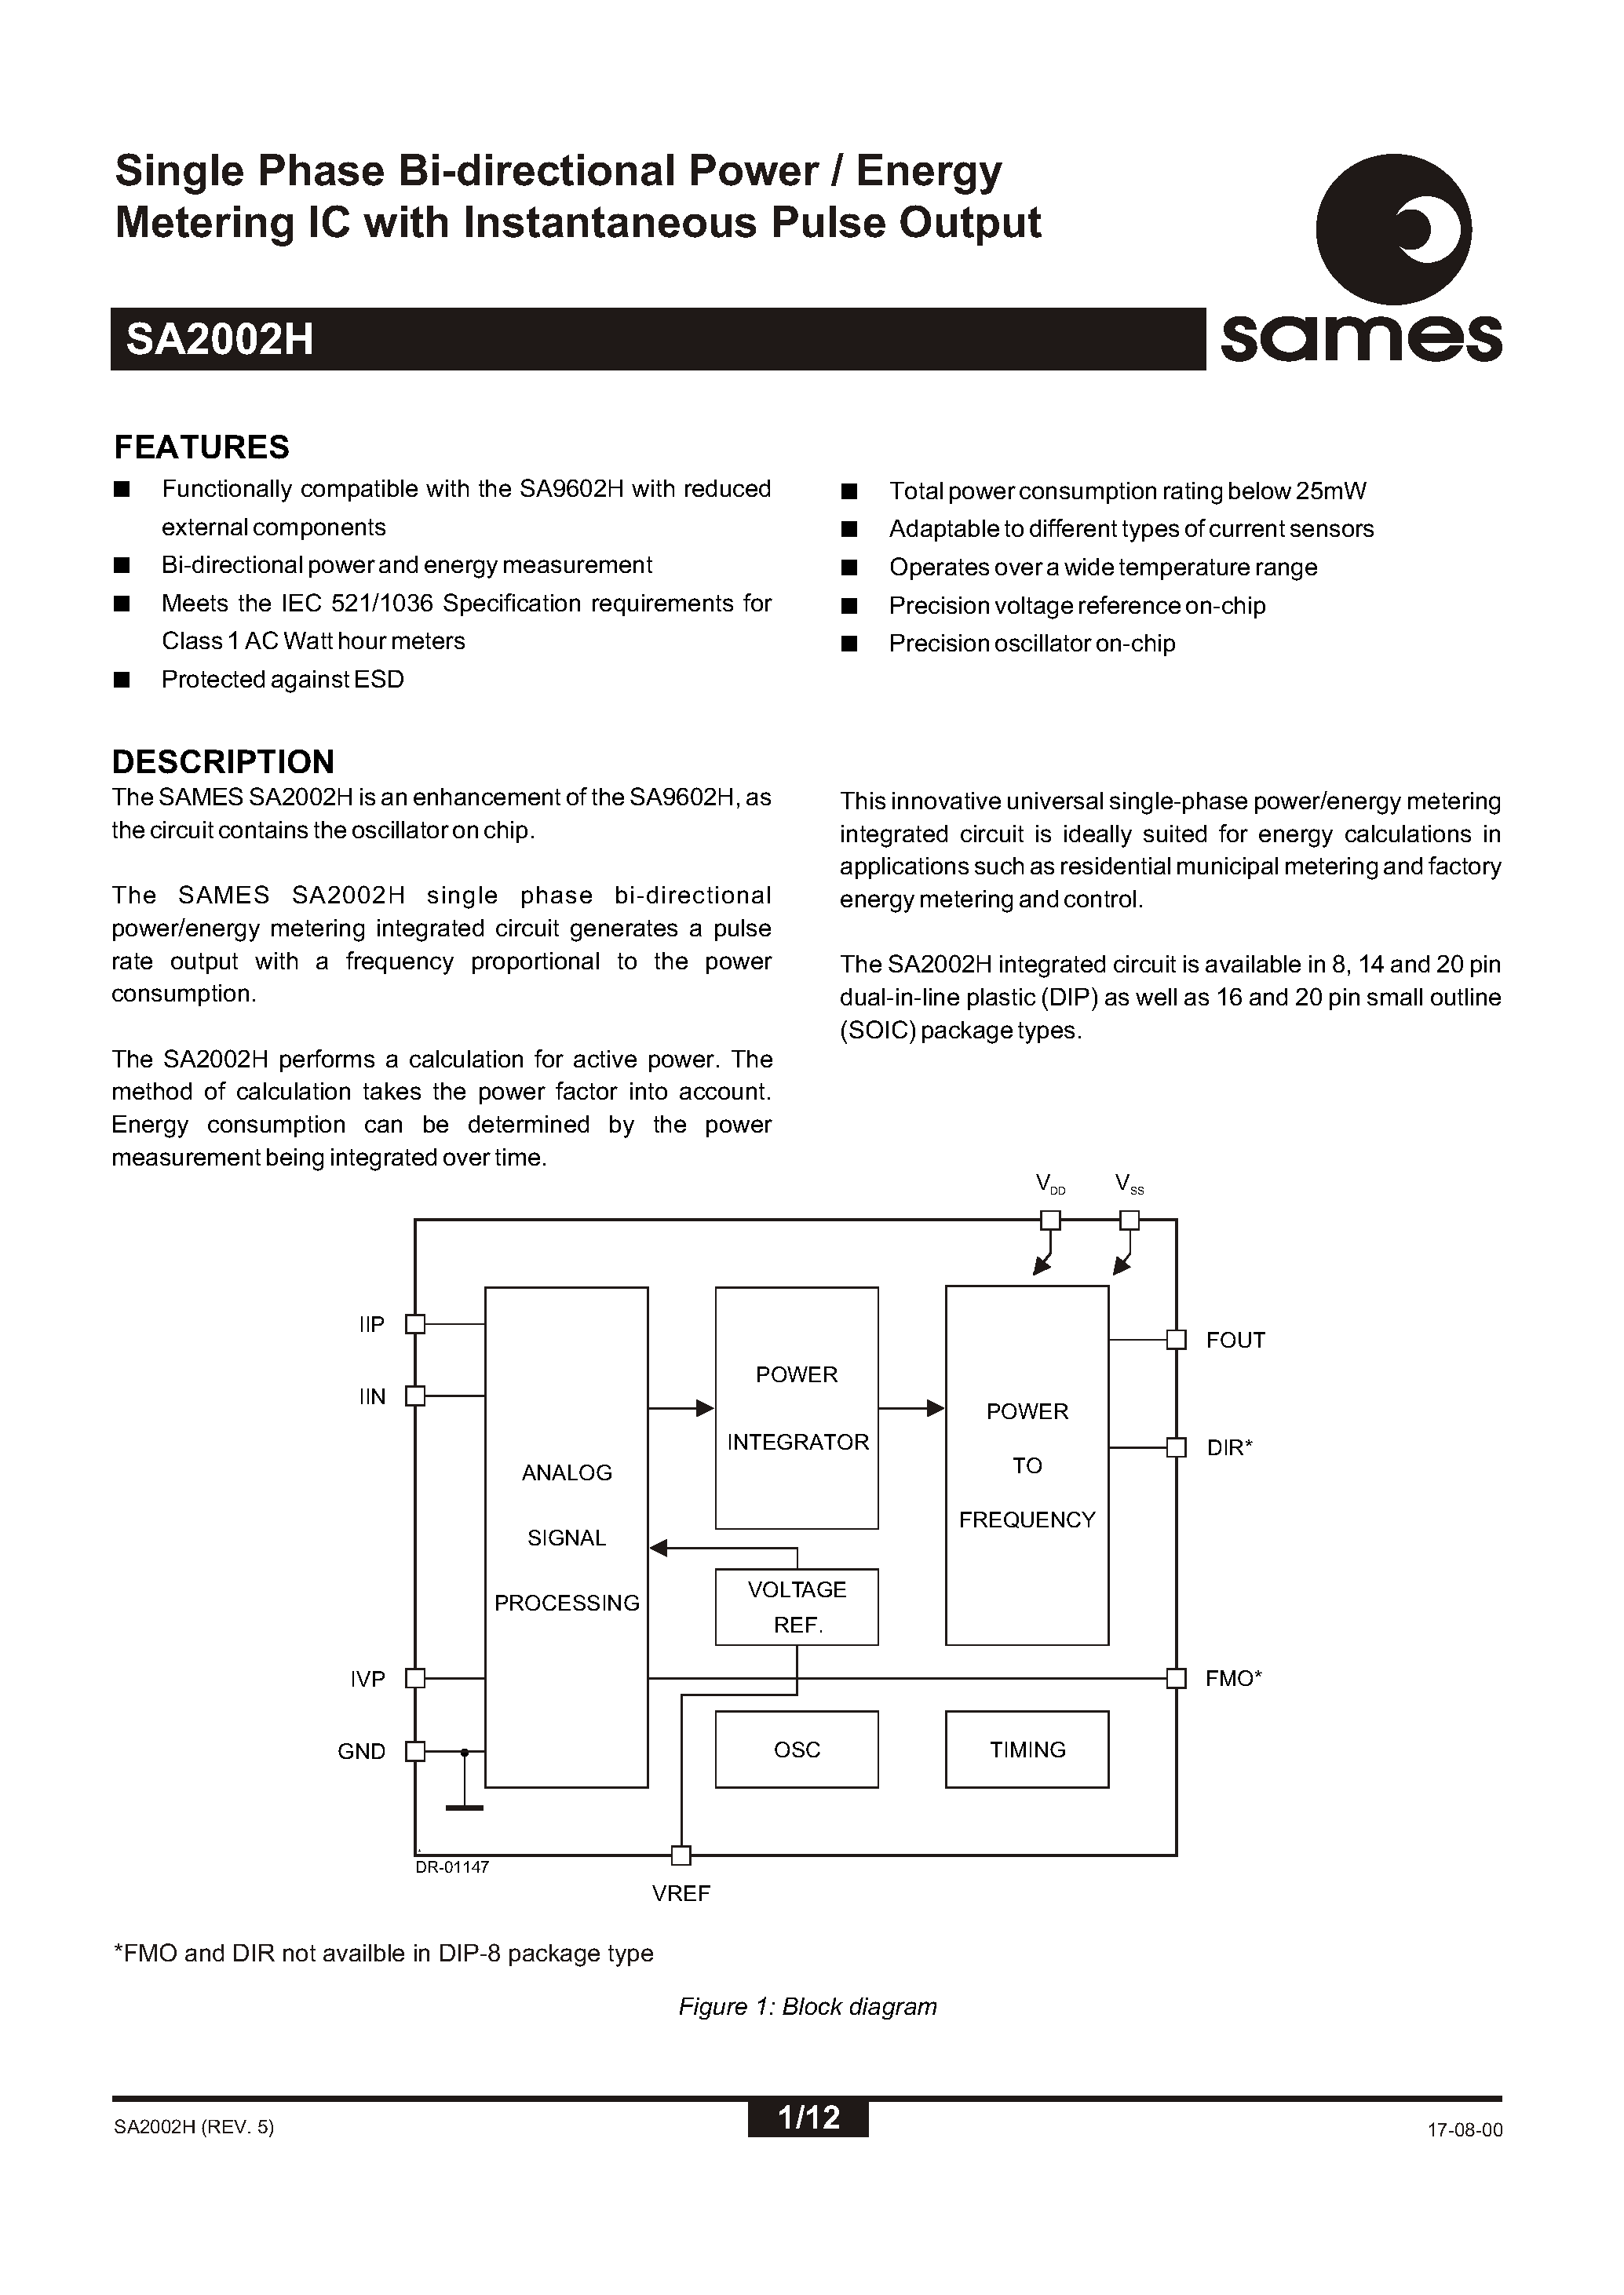 Datasheet SA2002HSA - Single Phase Bi-directional Power / Energy Metering IC with Instantaneous Pulse Output page 1